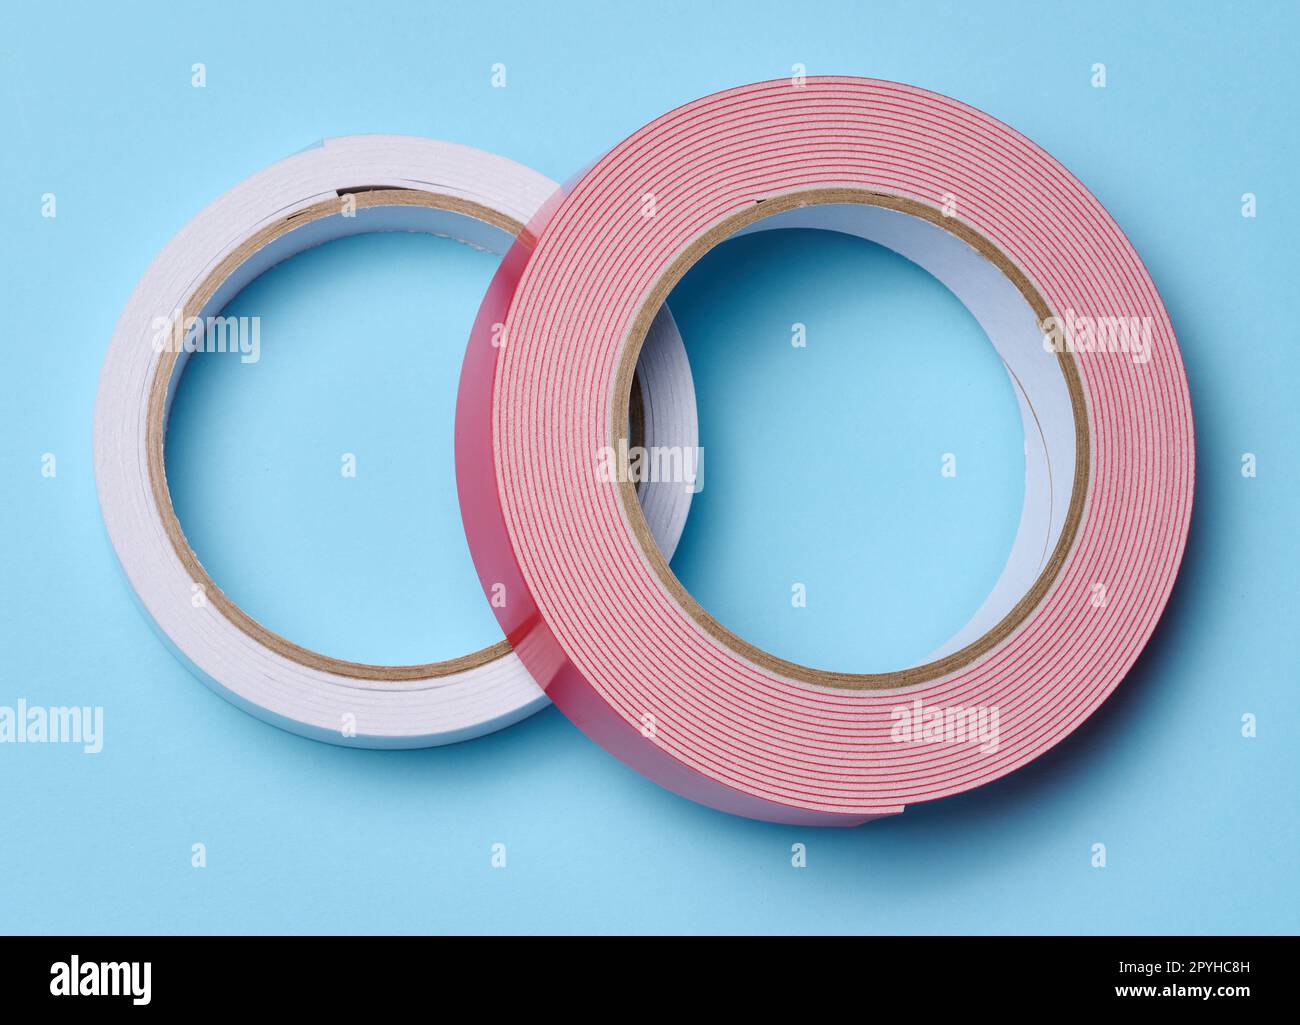 Two rolls of double-sided sticky tape on a blue background, top view Stock Photo